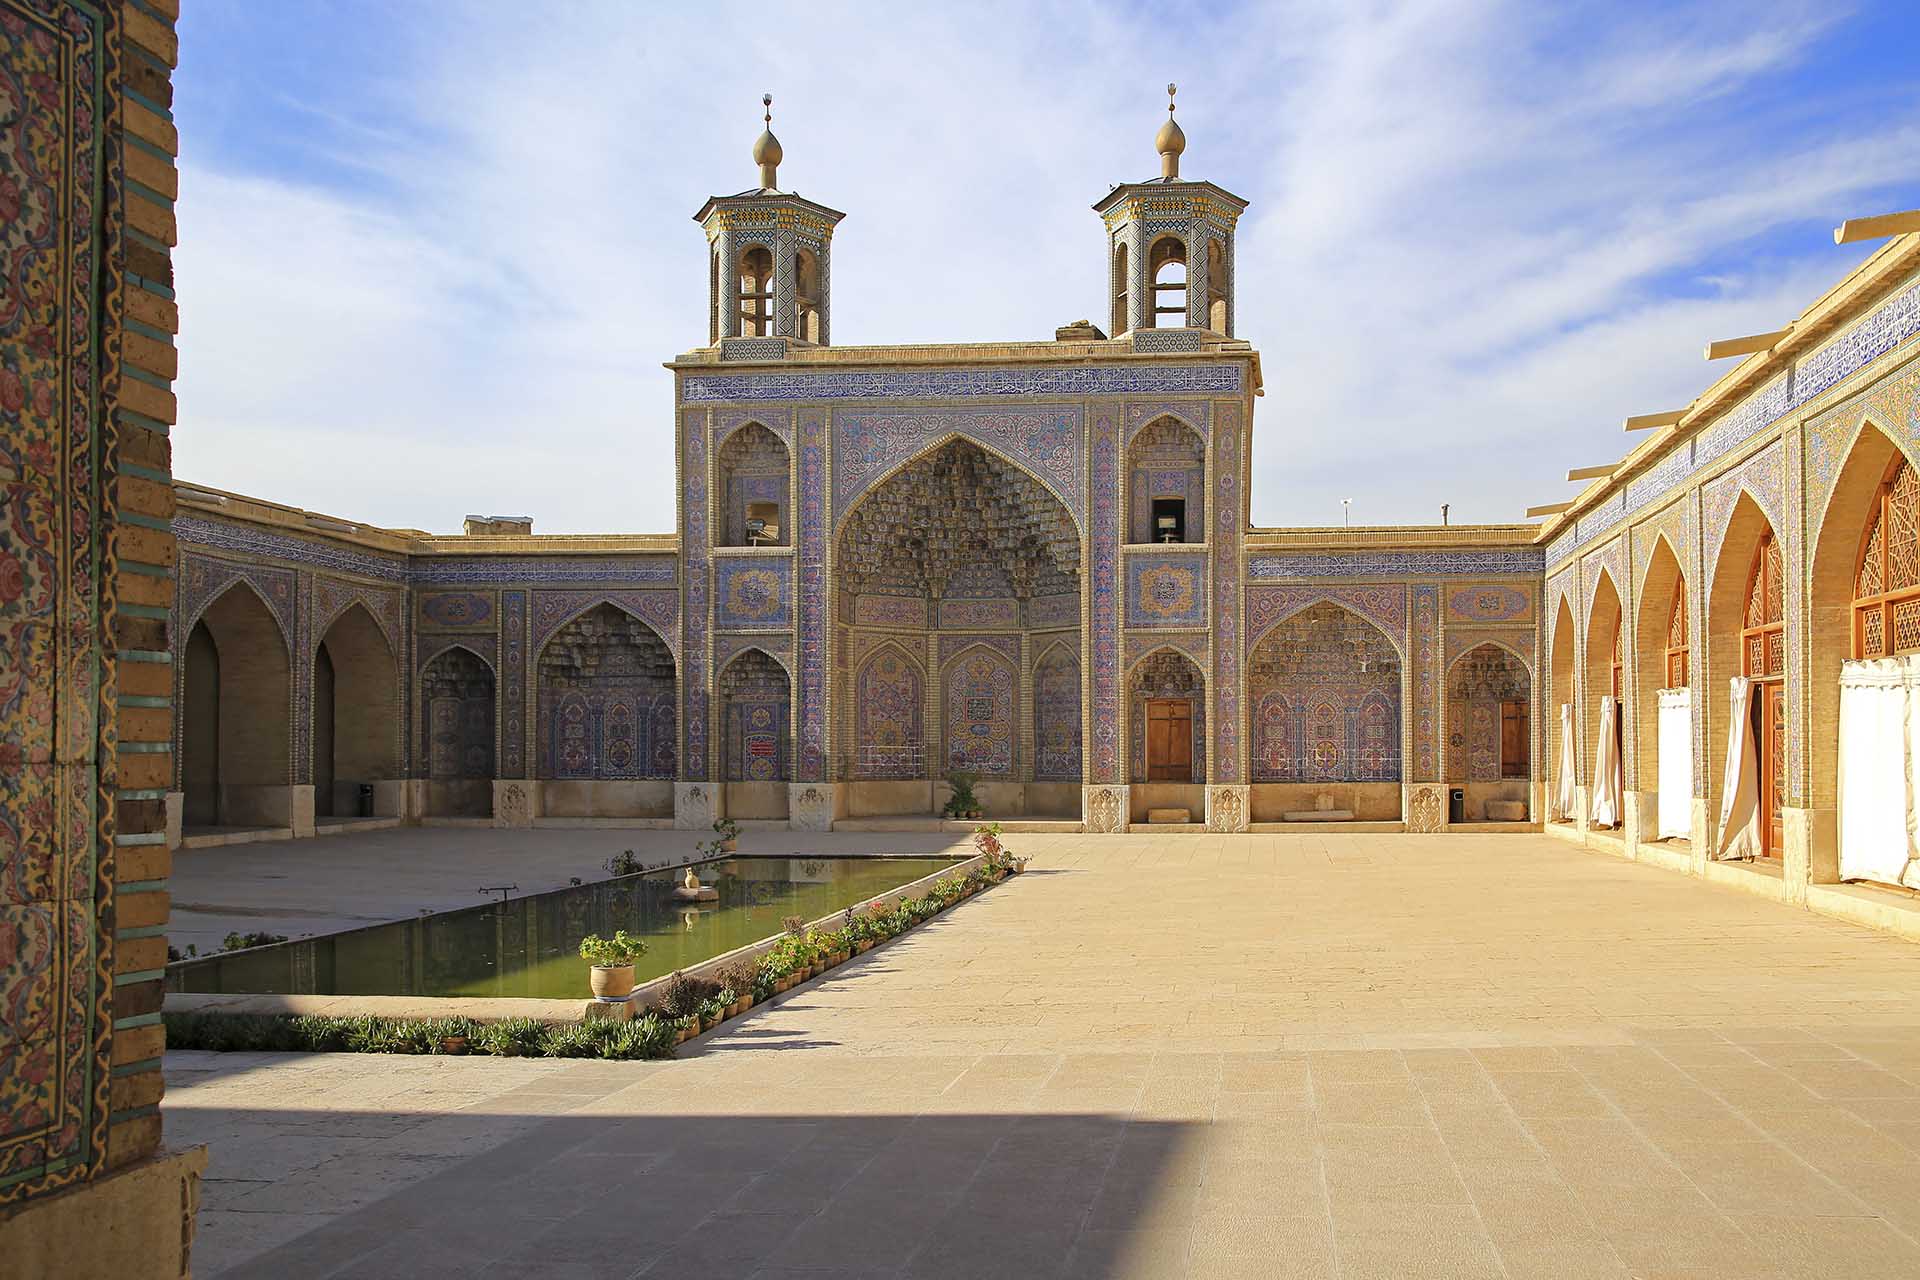 Exterior of the Pink Mosque in Isfahan, Iran. Photo credit: Ann Schneider